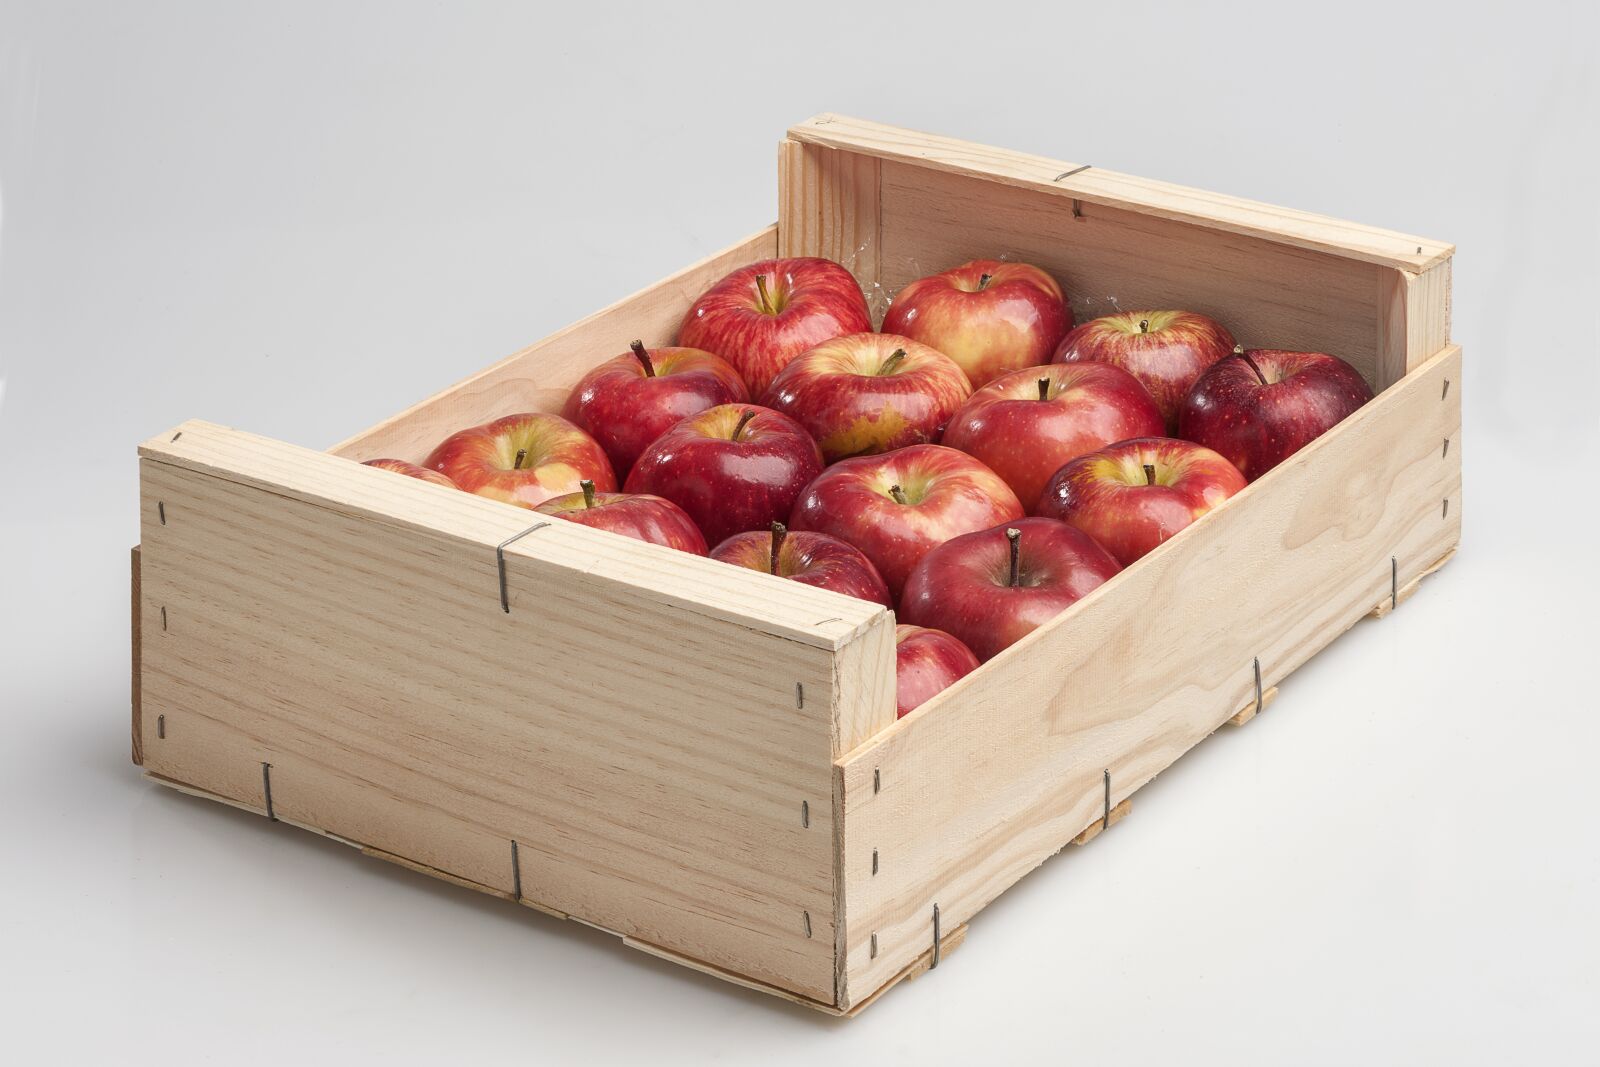 Nikon D3X sample photo. Box, container, wood photography